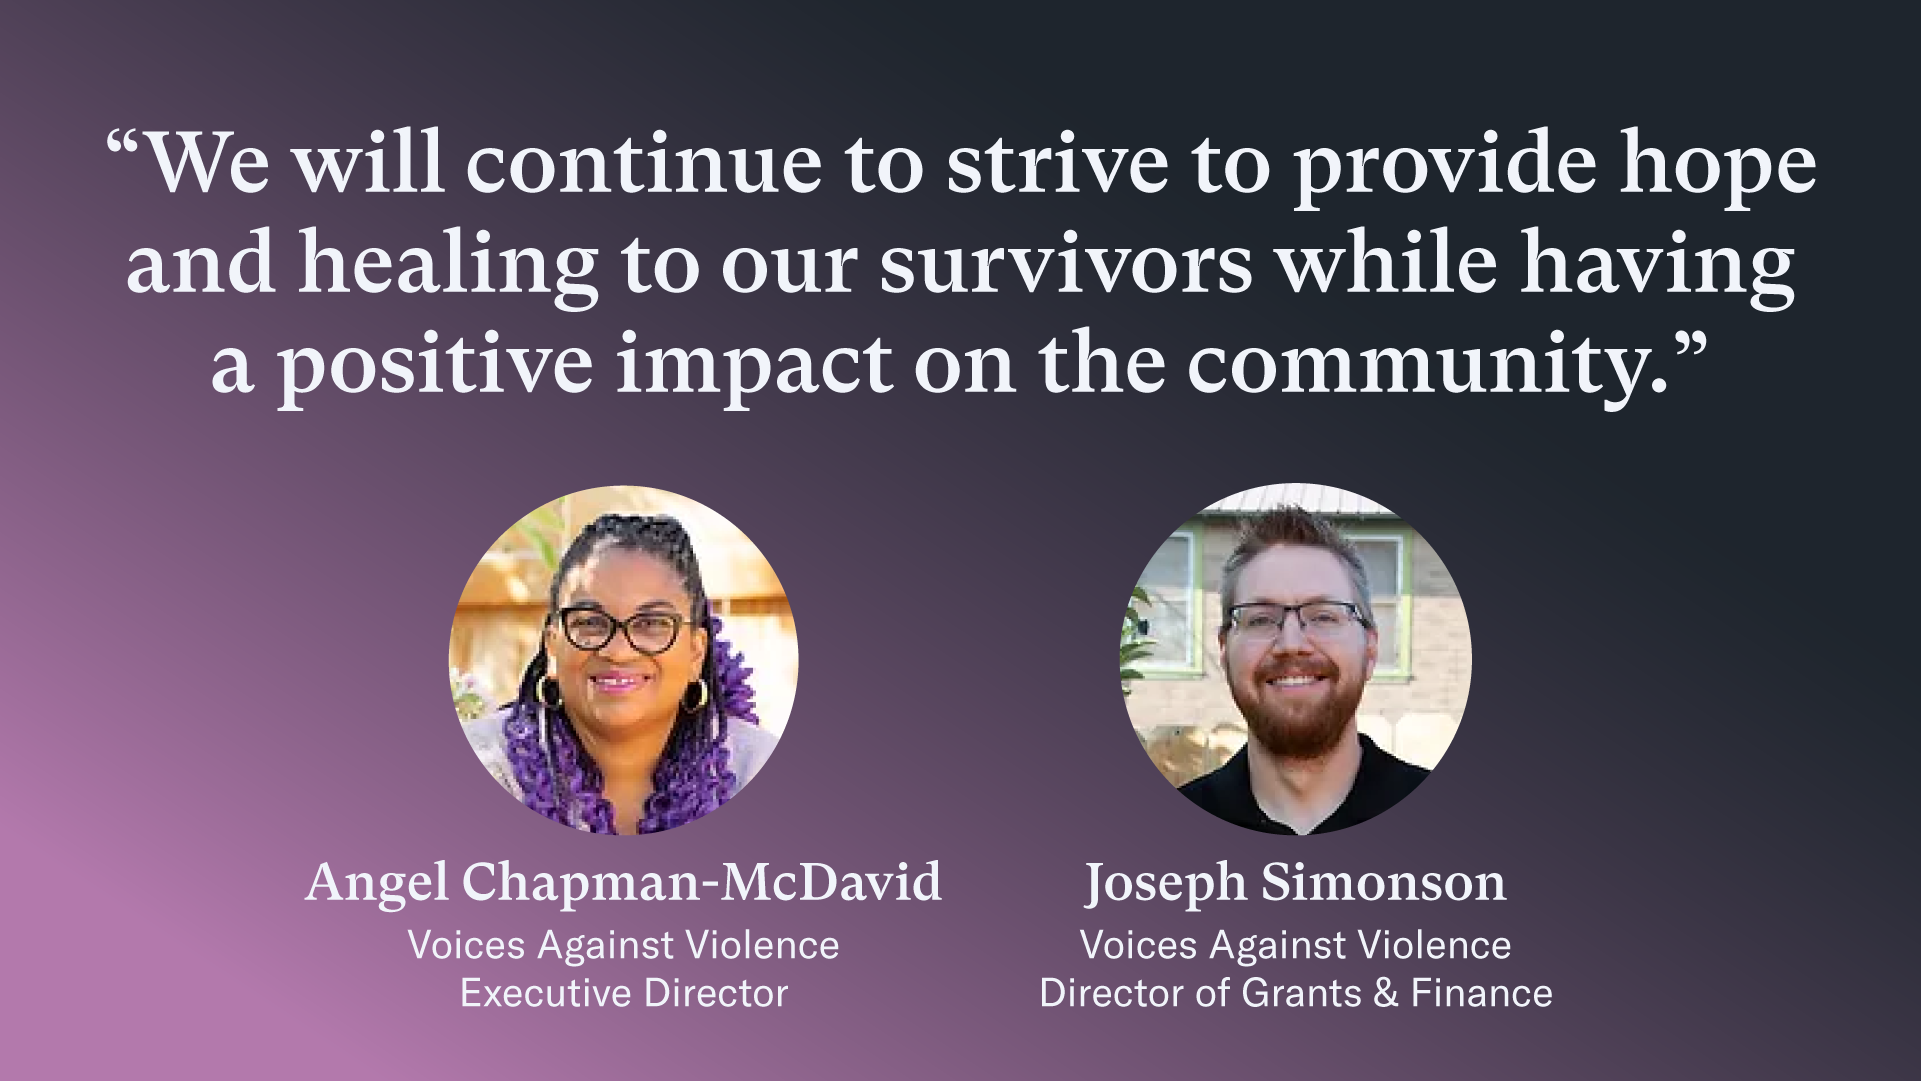 Quote graphic that reads "We will continue to strive to provide hope and healing to our survivors while having a positive impact on the community."